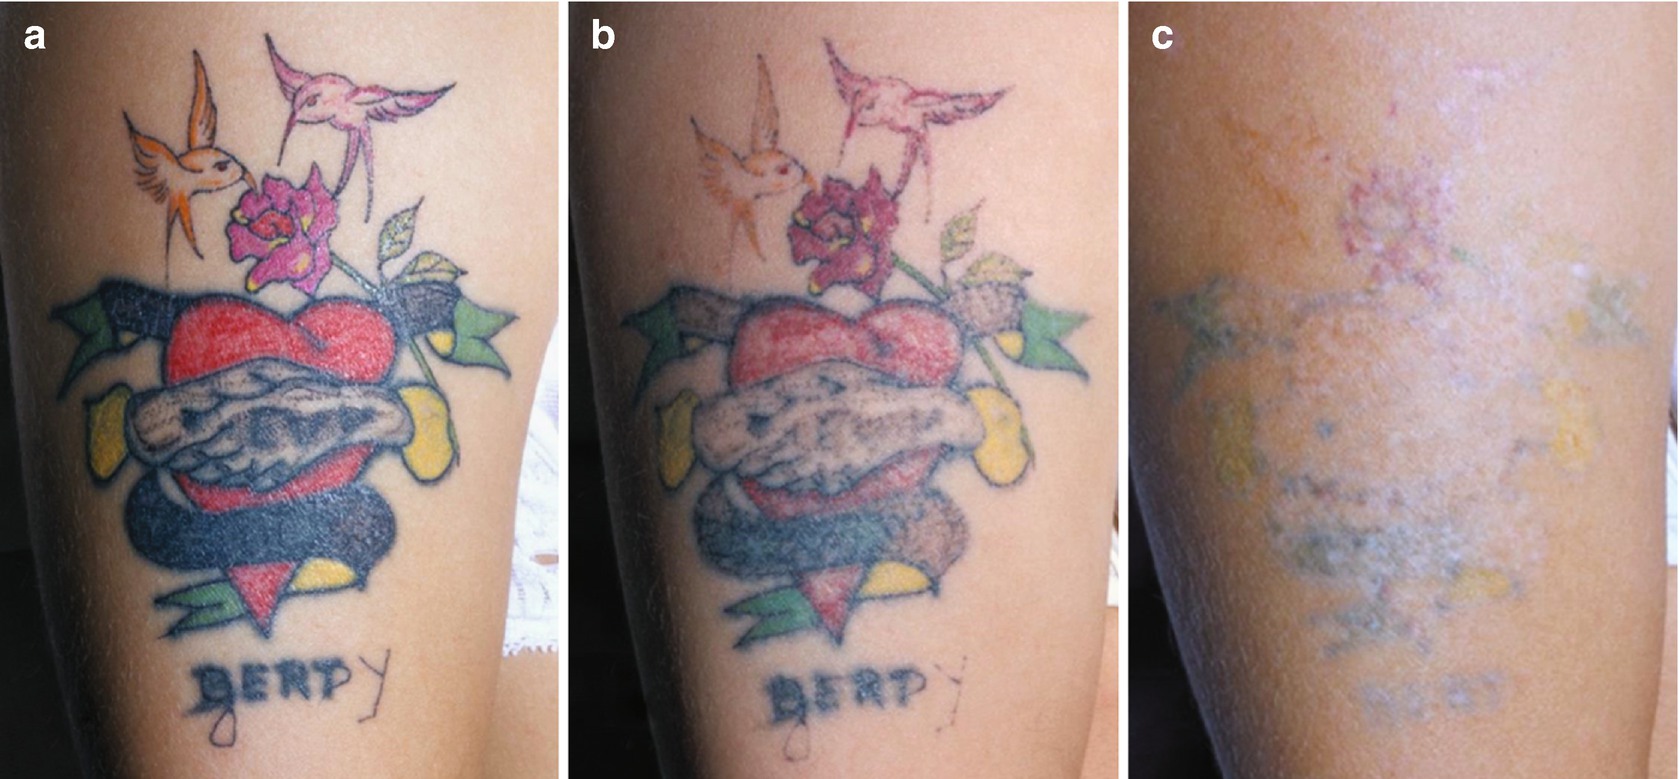 Tattoo Removal: Techniques and Devices | SpringerLink